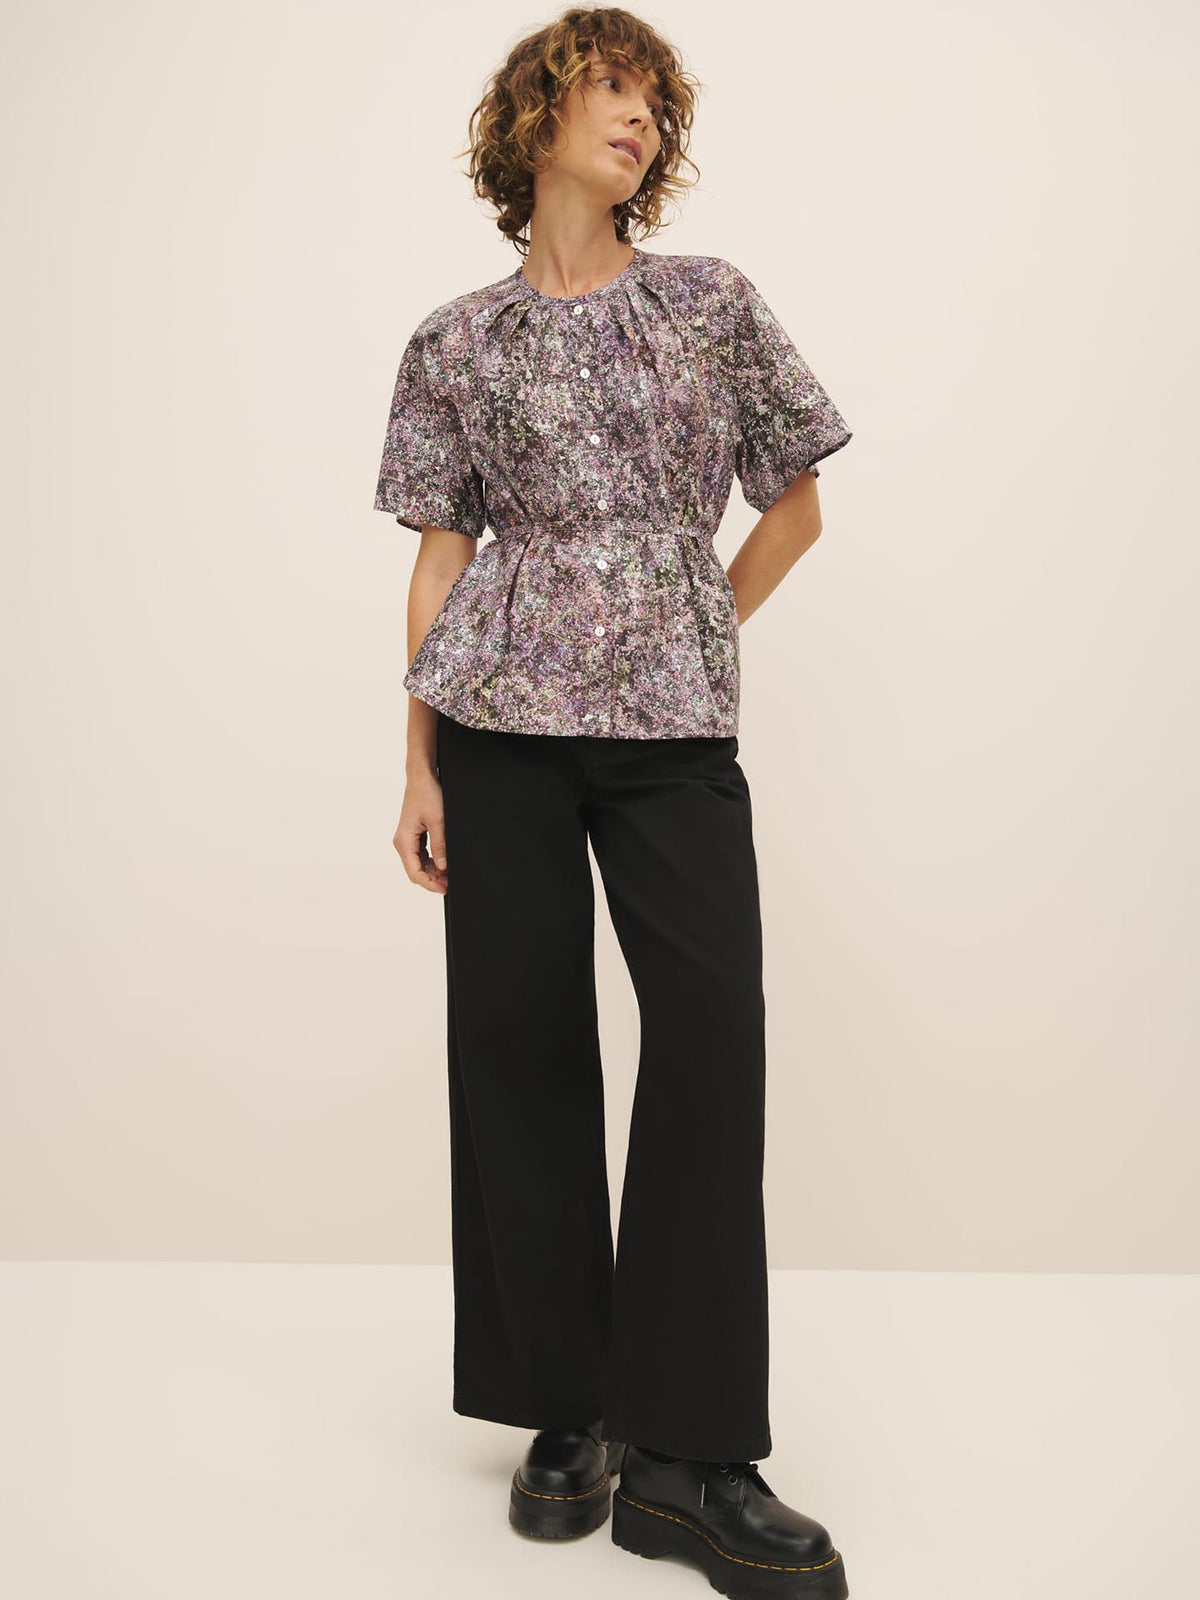 Woman posing in a Kowtow Etude Top – Bouquet with an oversized fit and black trousers.